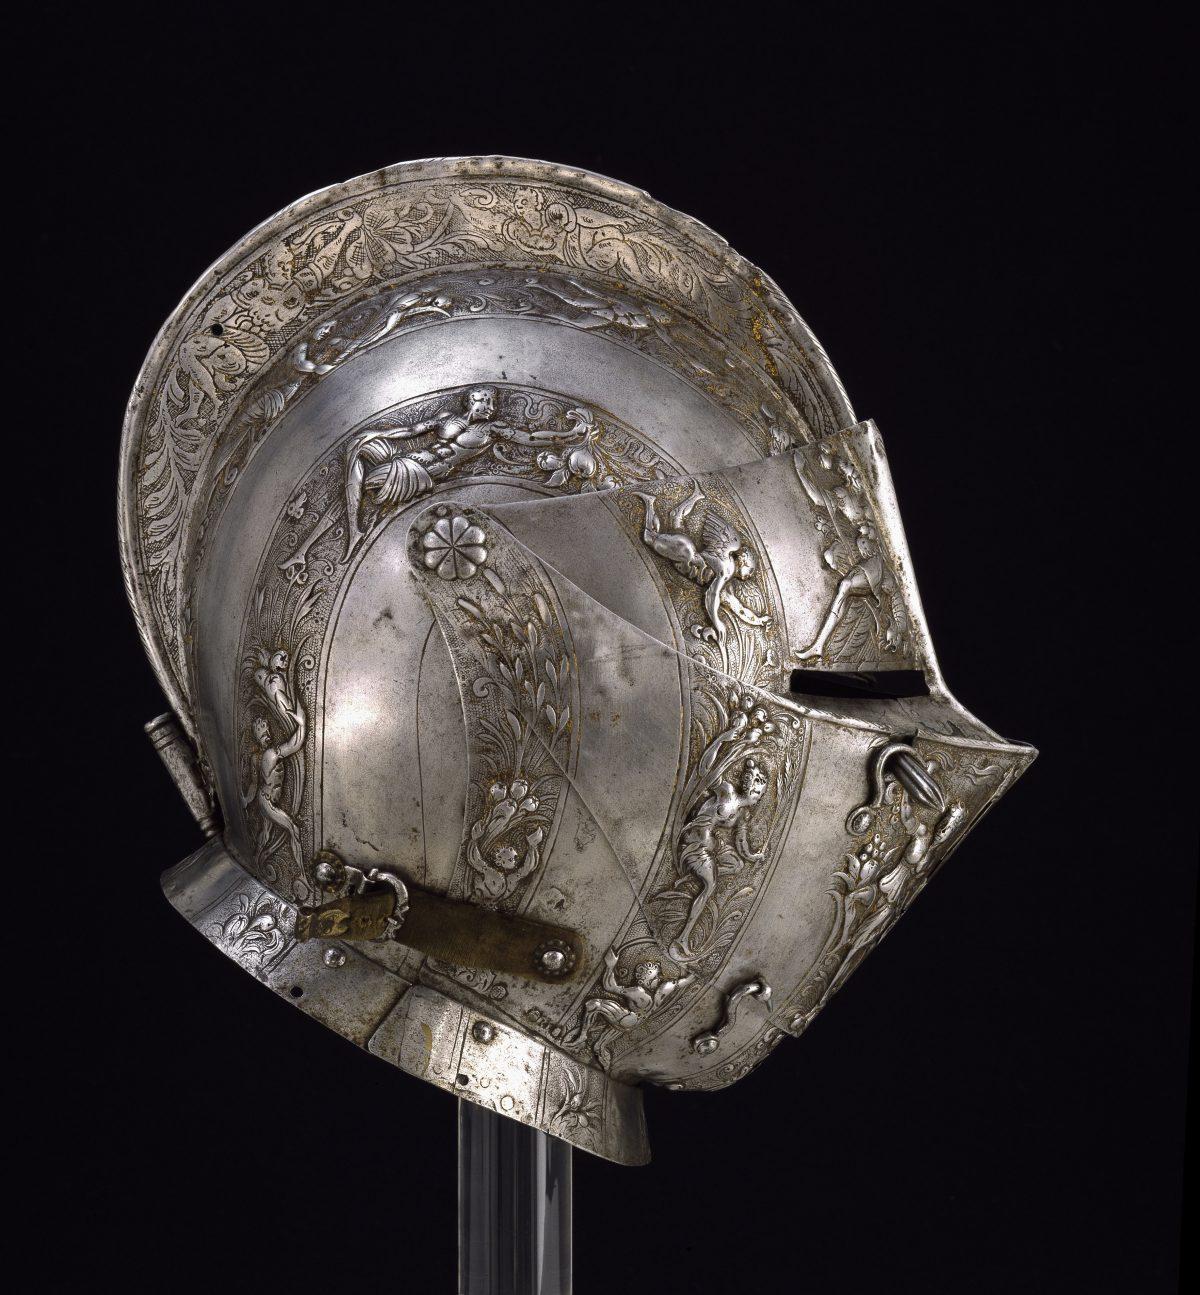 Close helmet, circa 1590, French manufacture. Steel; 11 3/4 inches by 13 inches by 7 7/8 inches. Stibbert Museum, Florence. (The John and Mable Ringling Museum of Art)